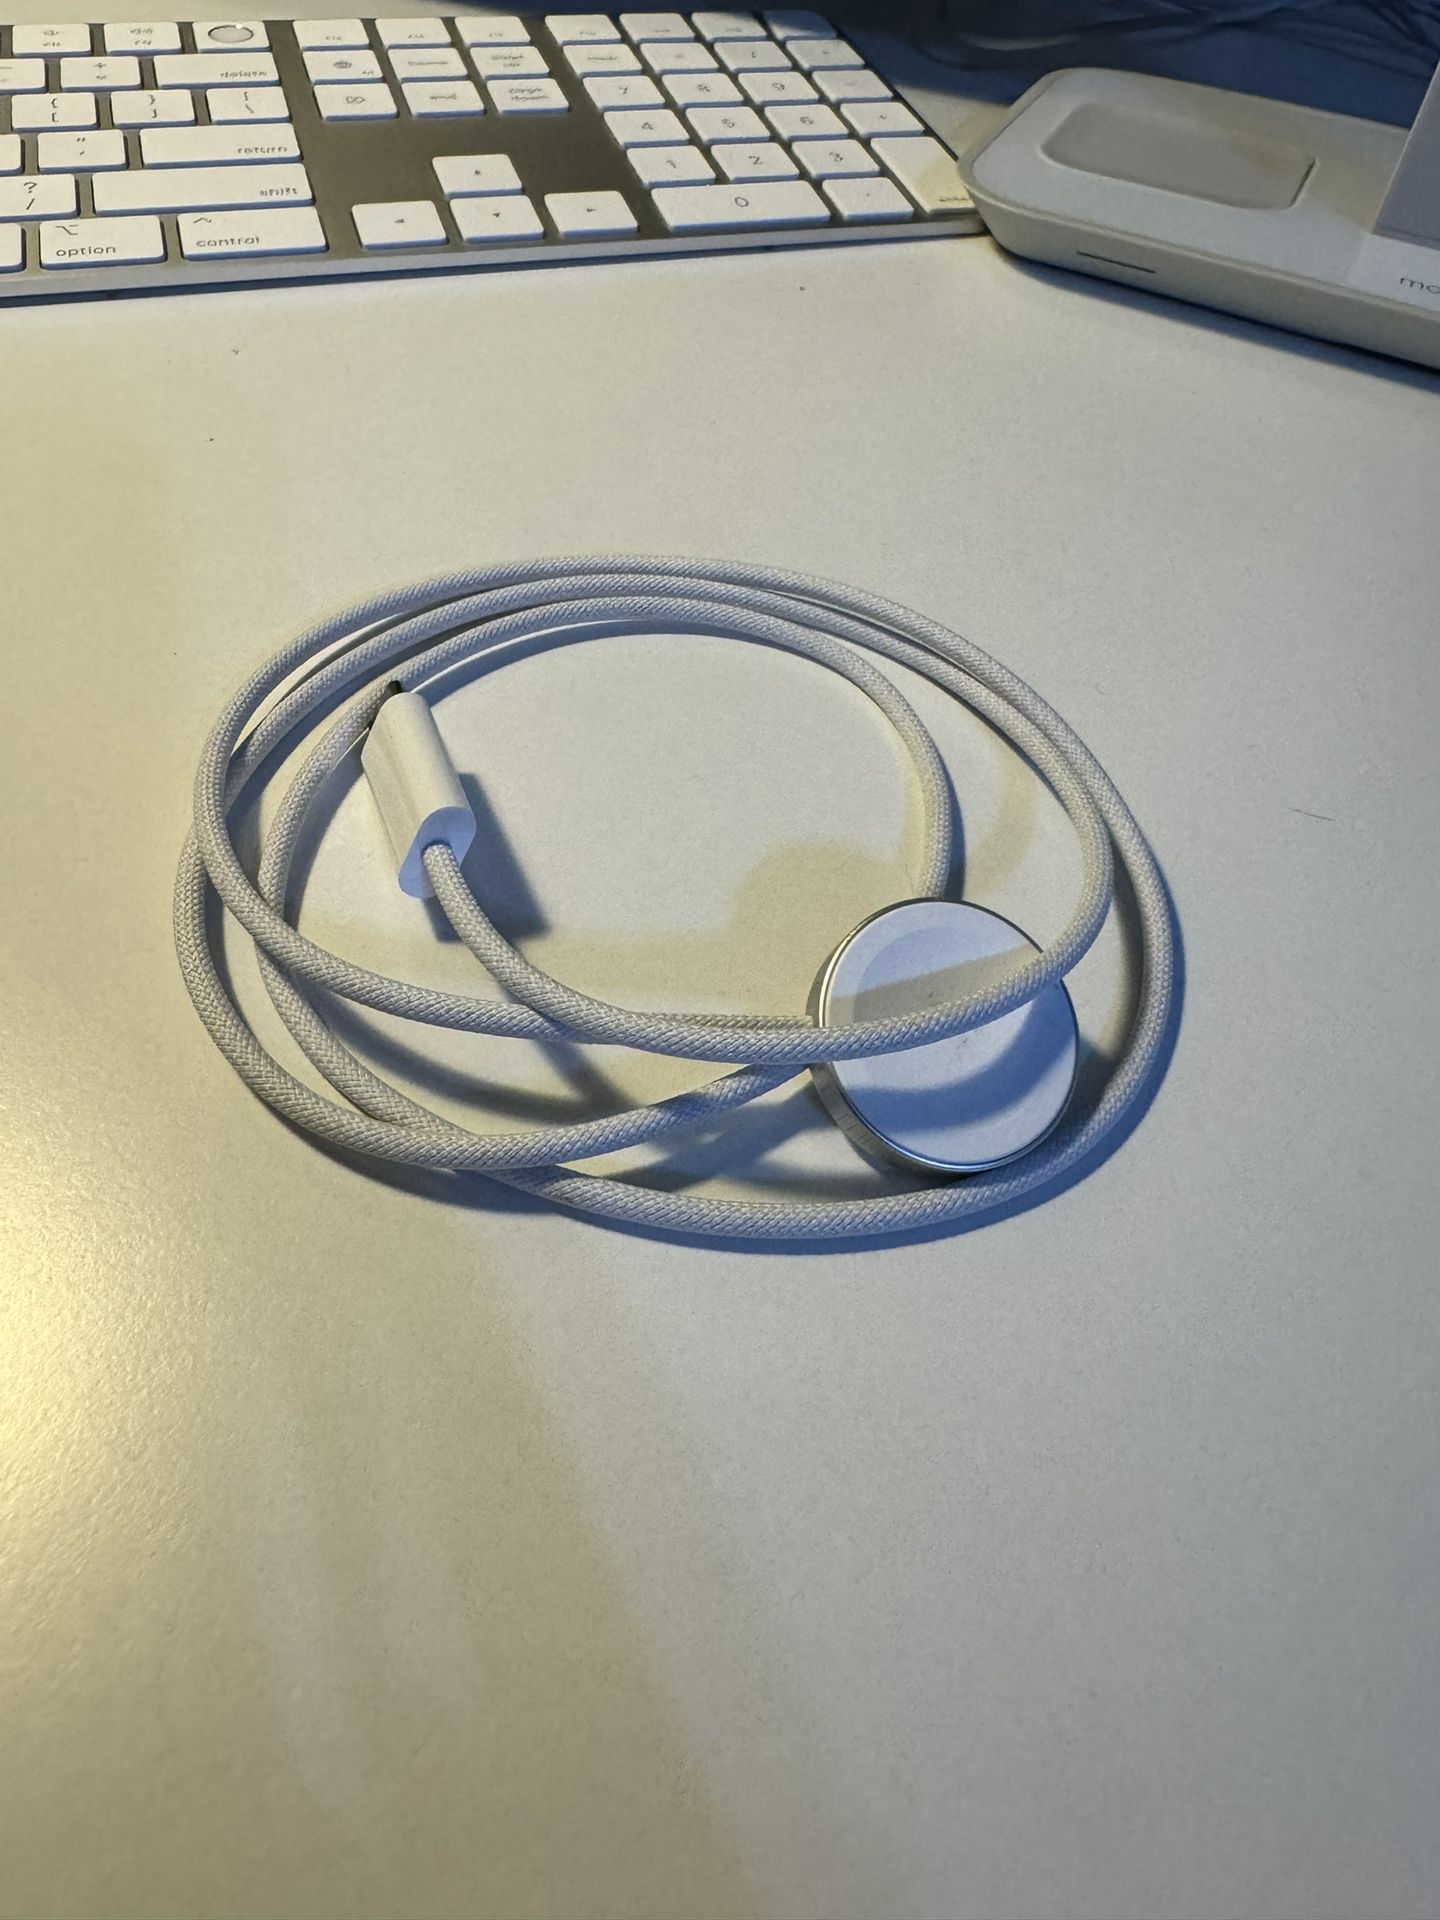 Braided Apple Watch Charger